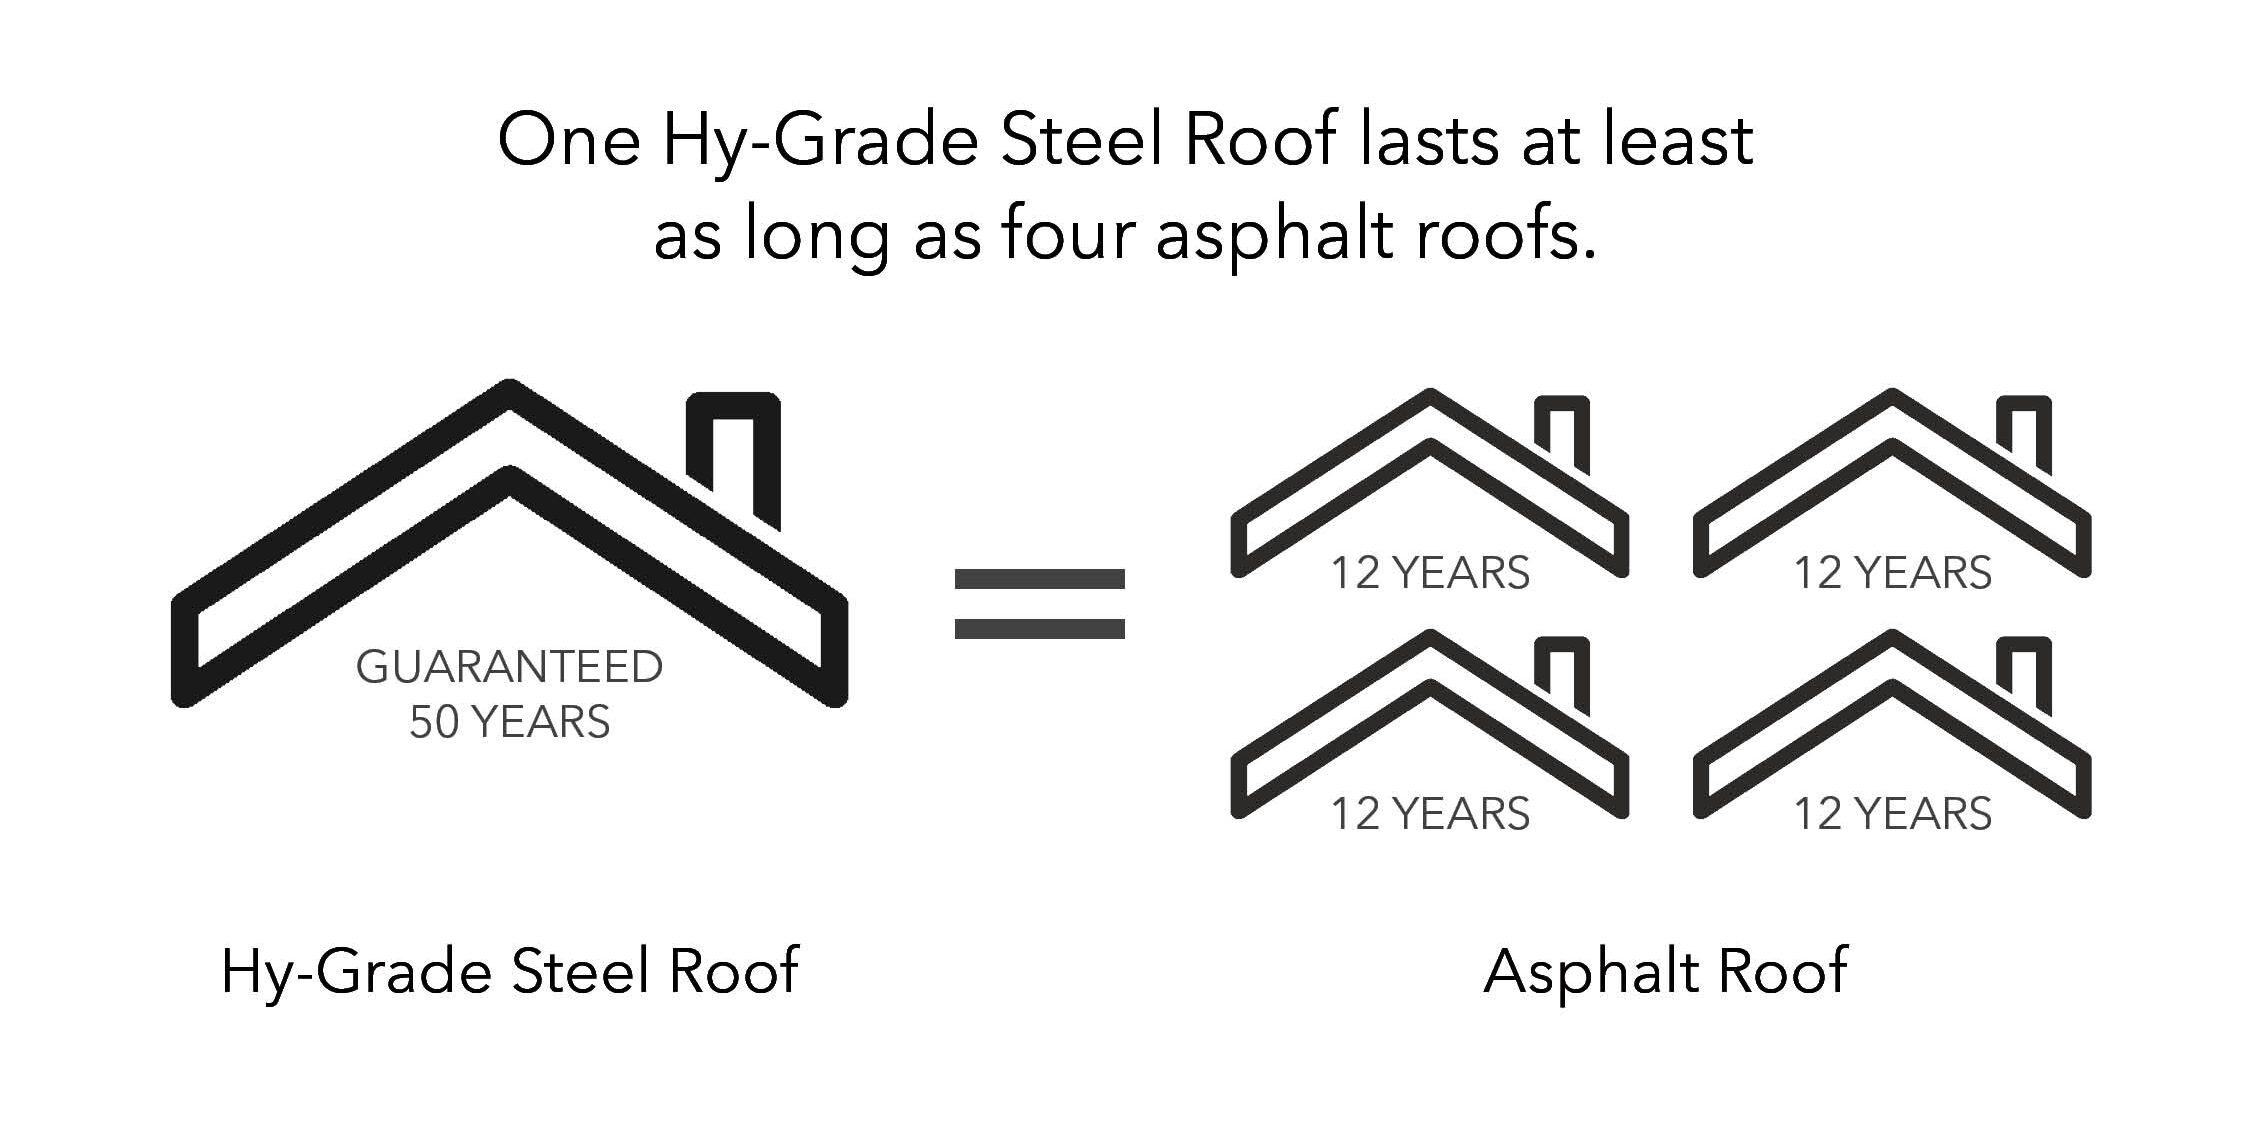 Infographic showing that one Hy-Grade Steel Roof compared to 4 asphalt roofs